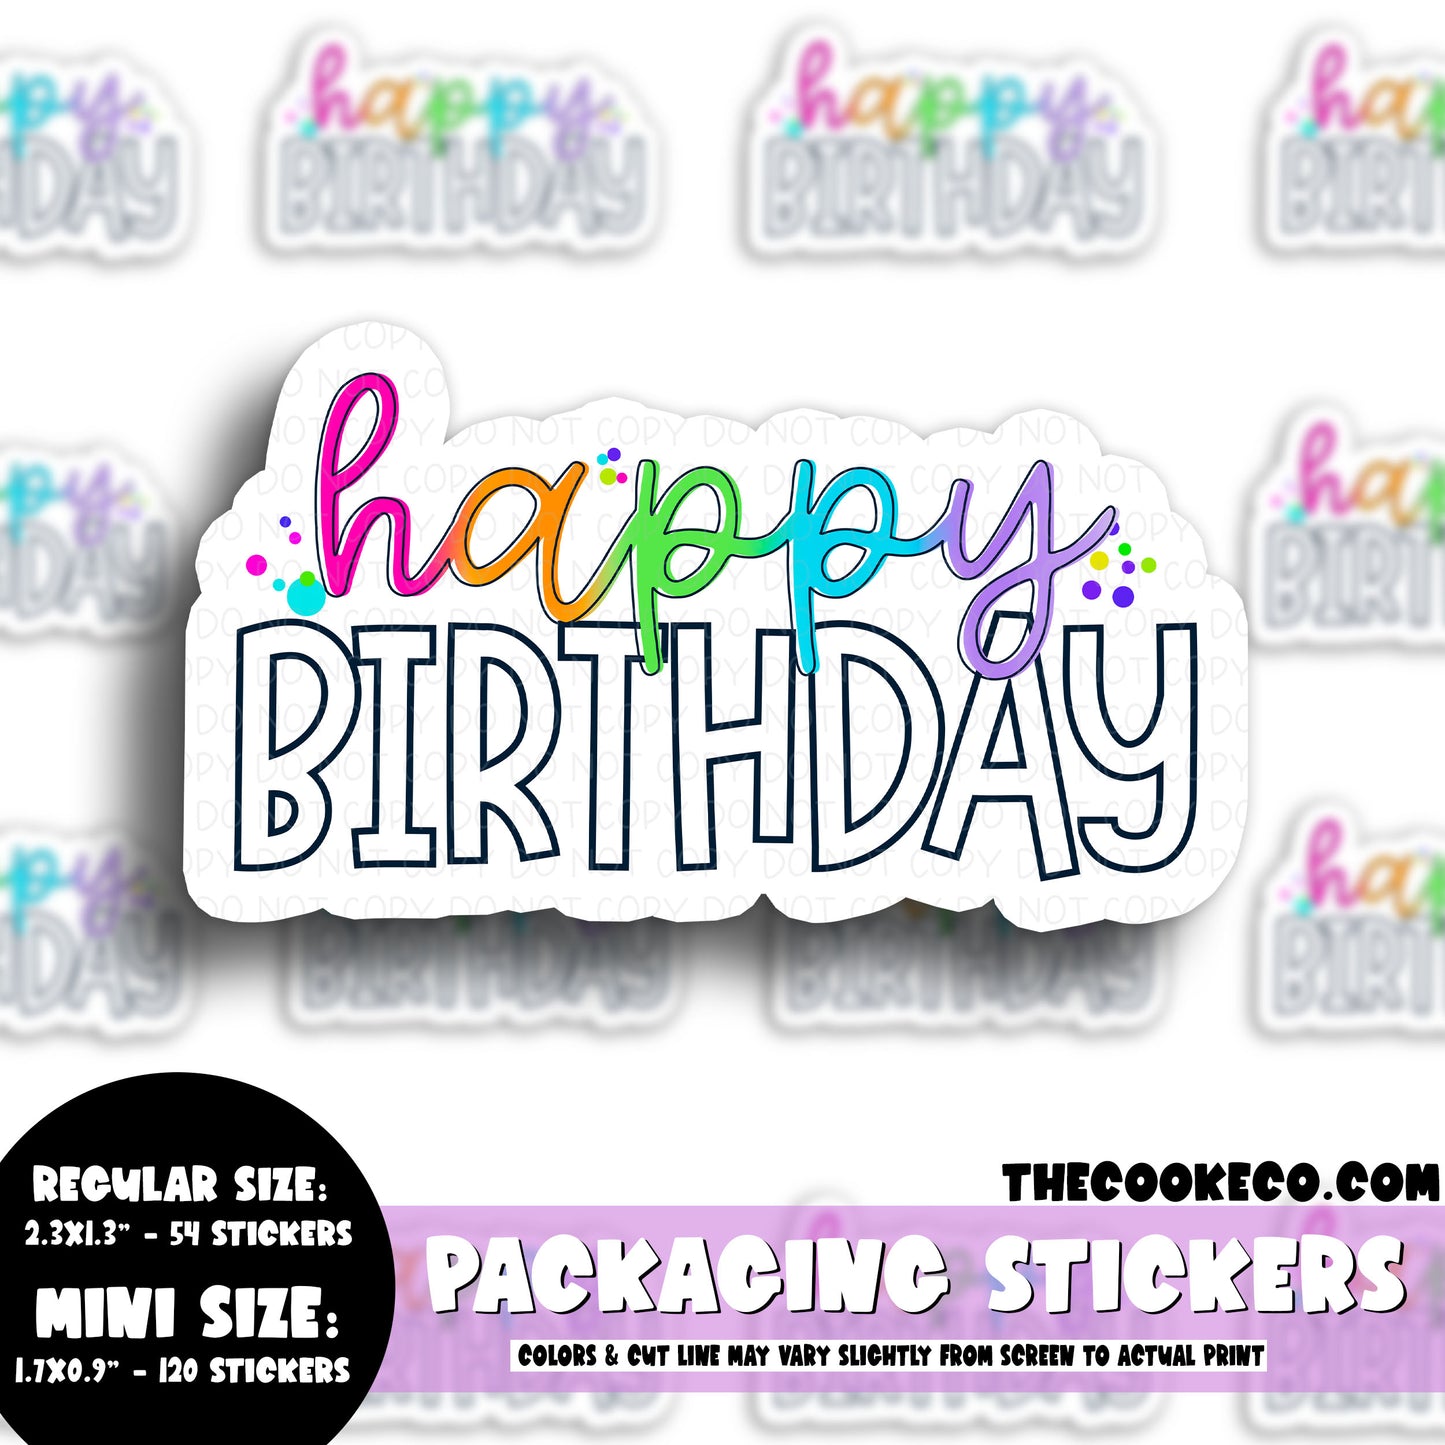 Packaging Stickers | #C0553 - HAPPY BIRTHDAY COLORFUL